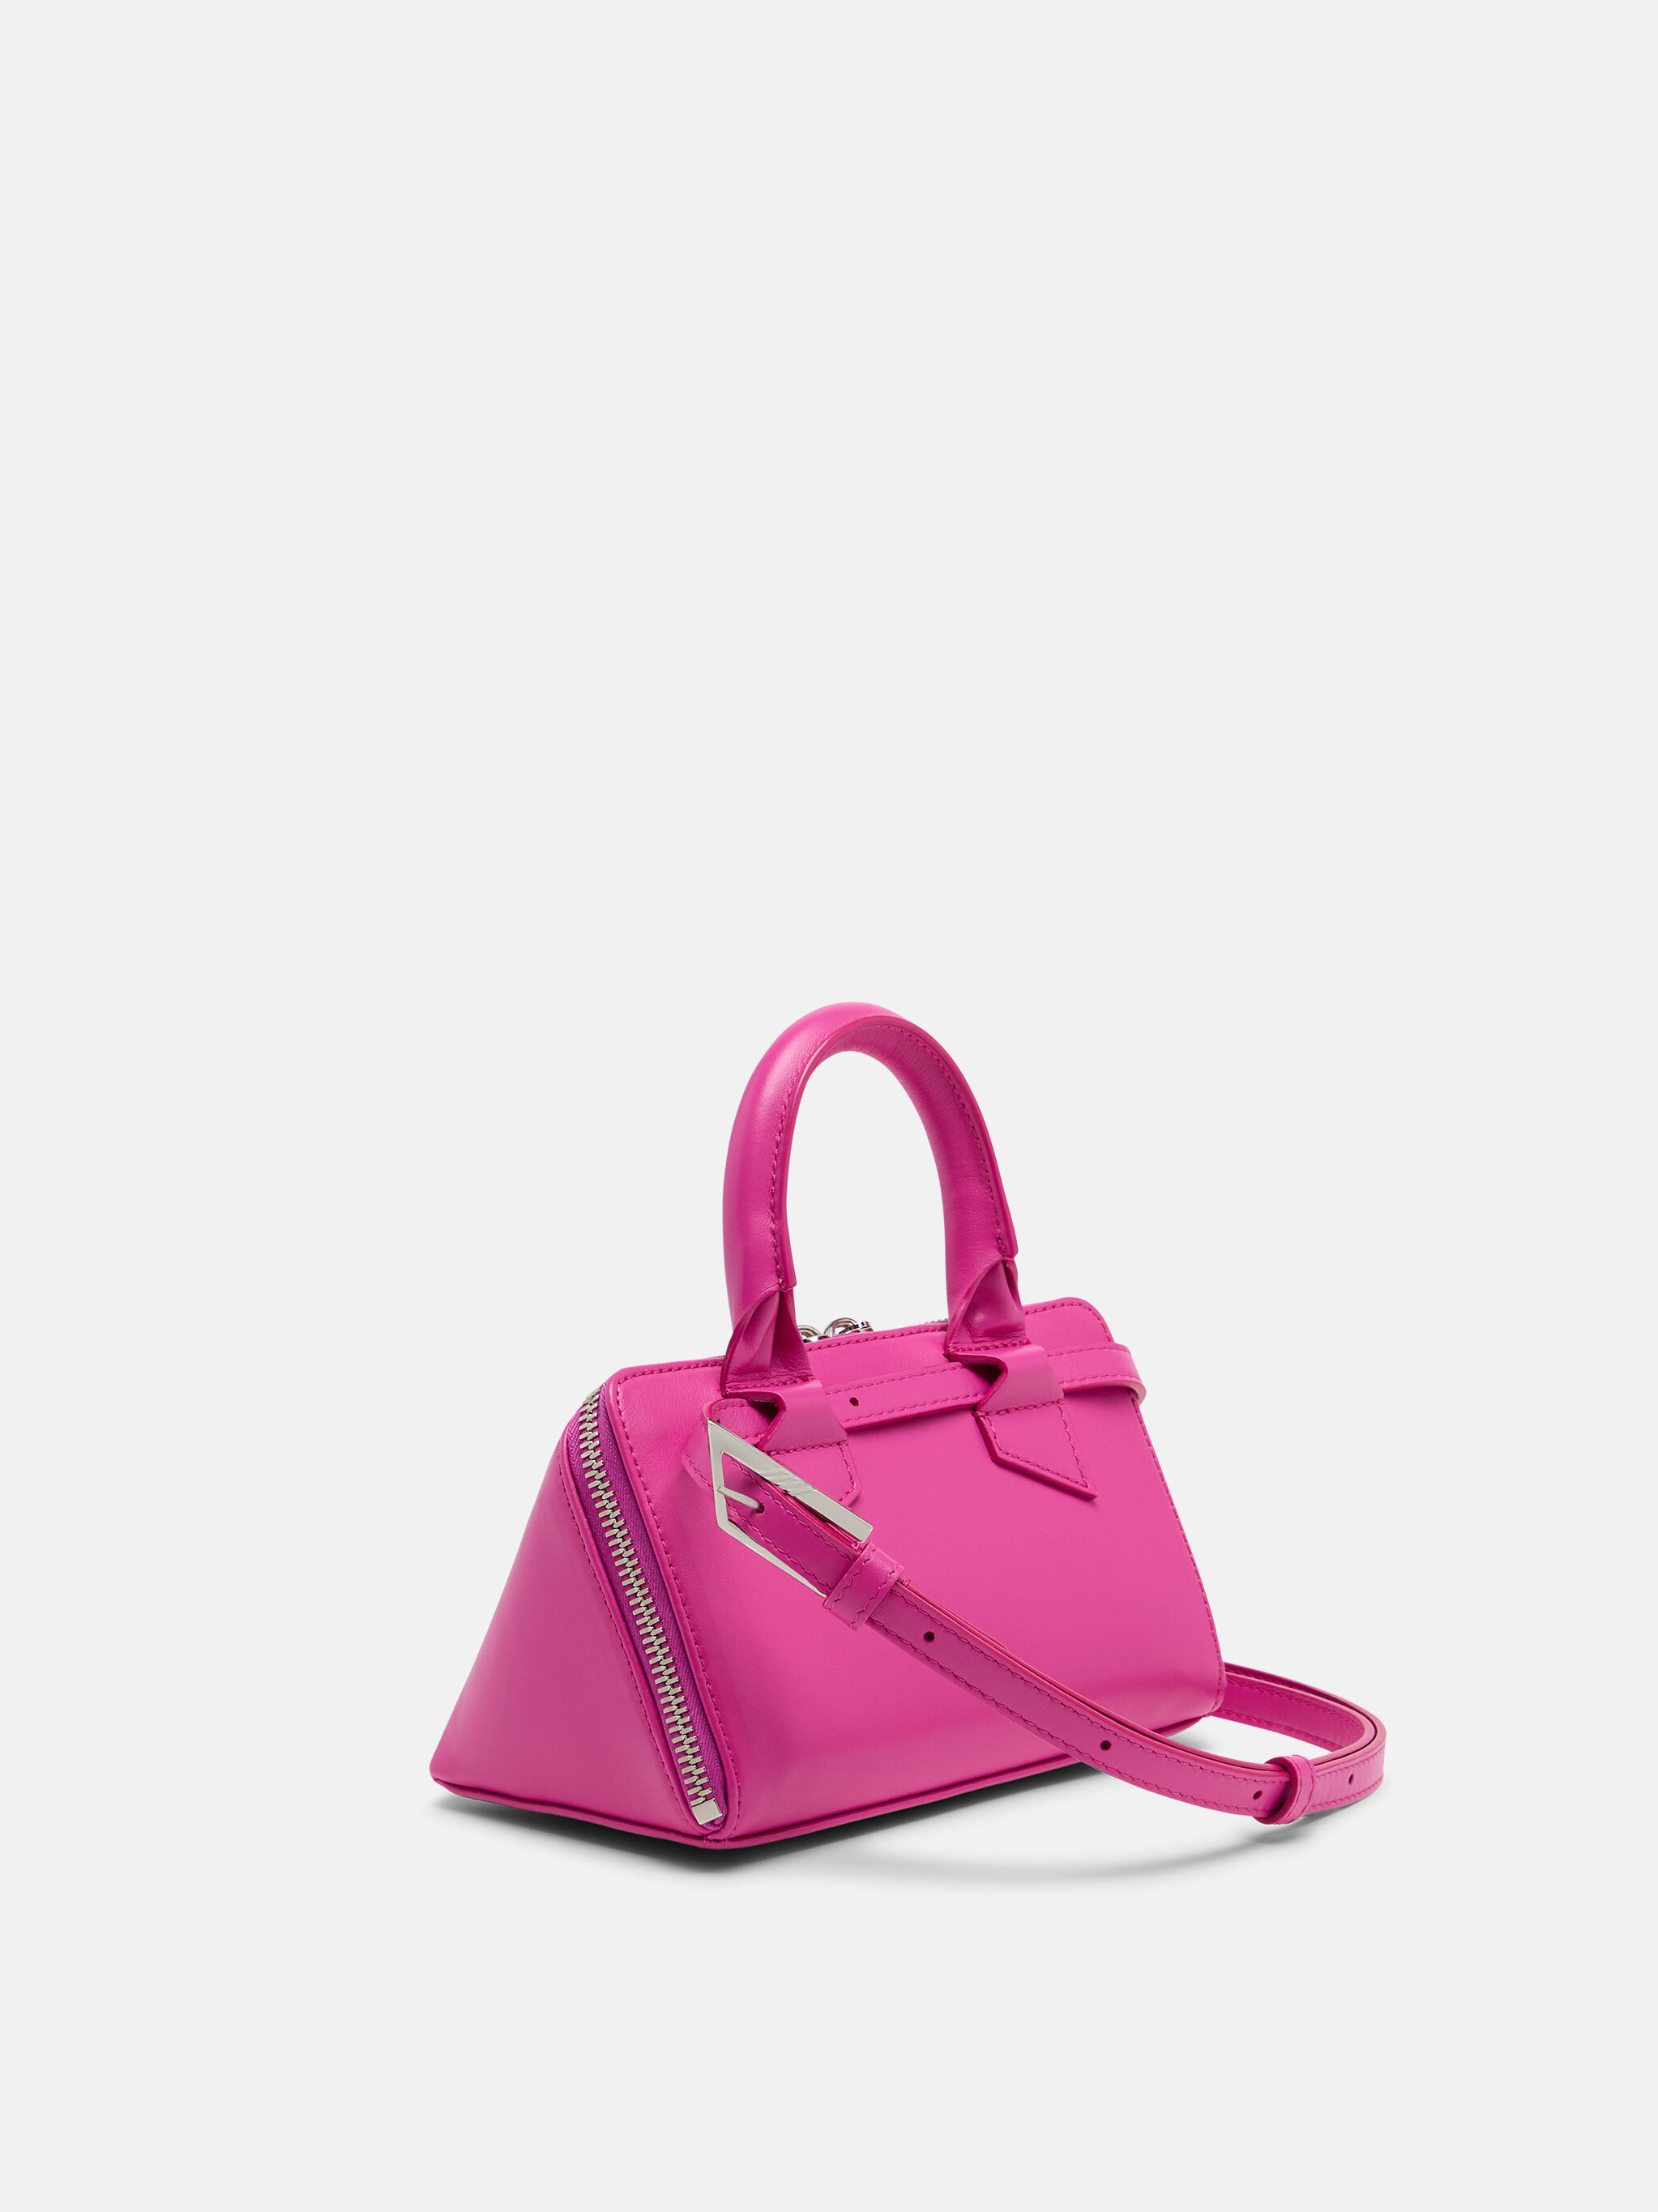 Michael Kors - Dear Valentine: our pretty pink handbags, like the Carmen  satchel, are guaranteed to put a smile on her face. http://mko.rs/6187H5BUU  #MichaelKors #ValentinesDay | Facebook